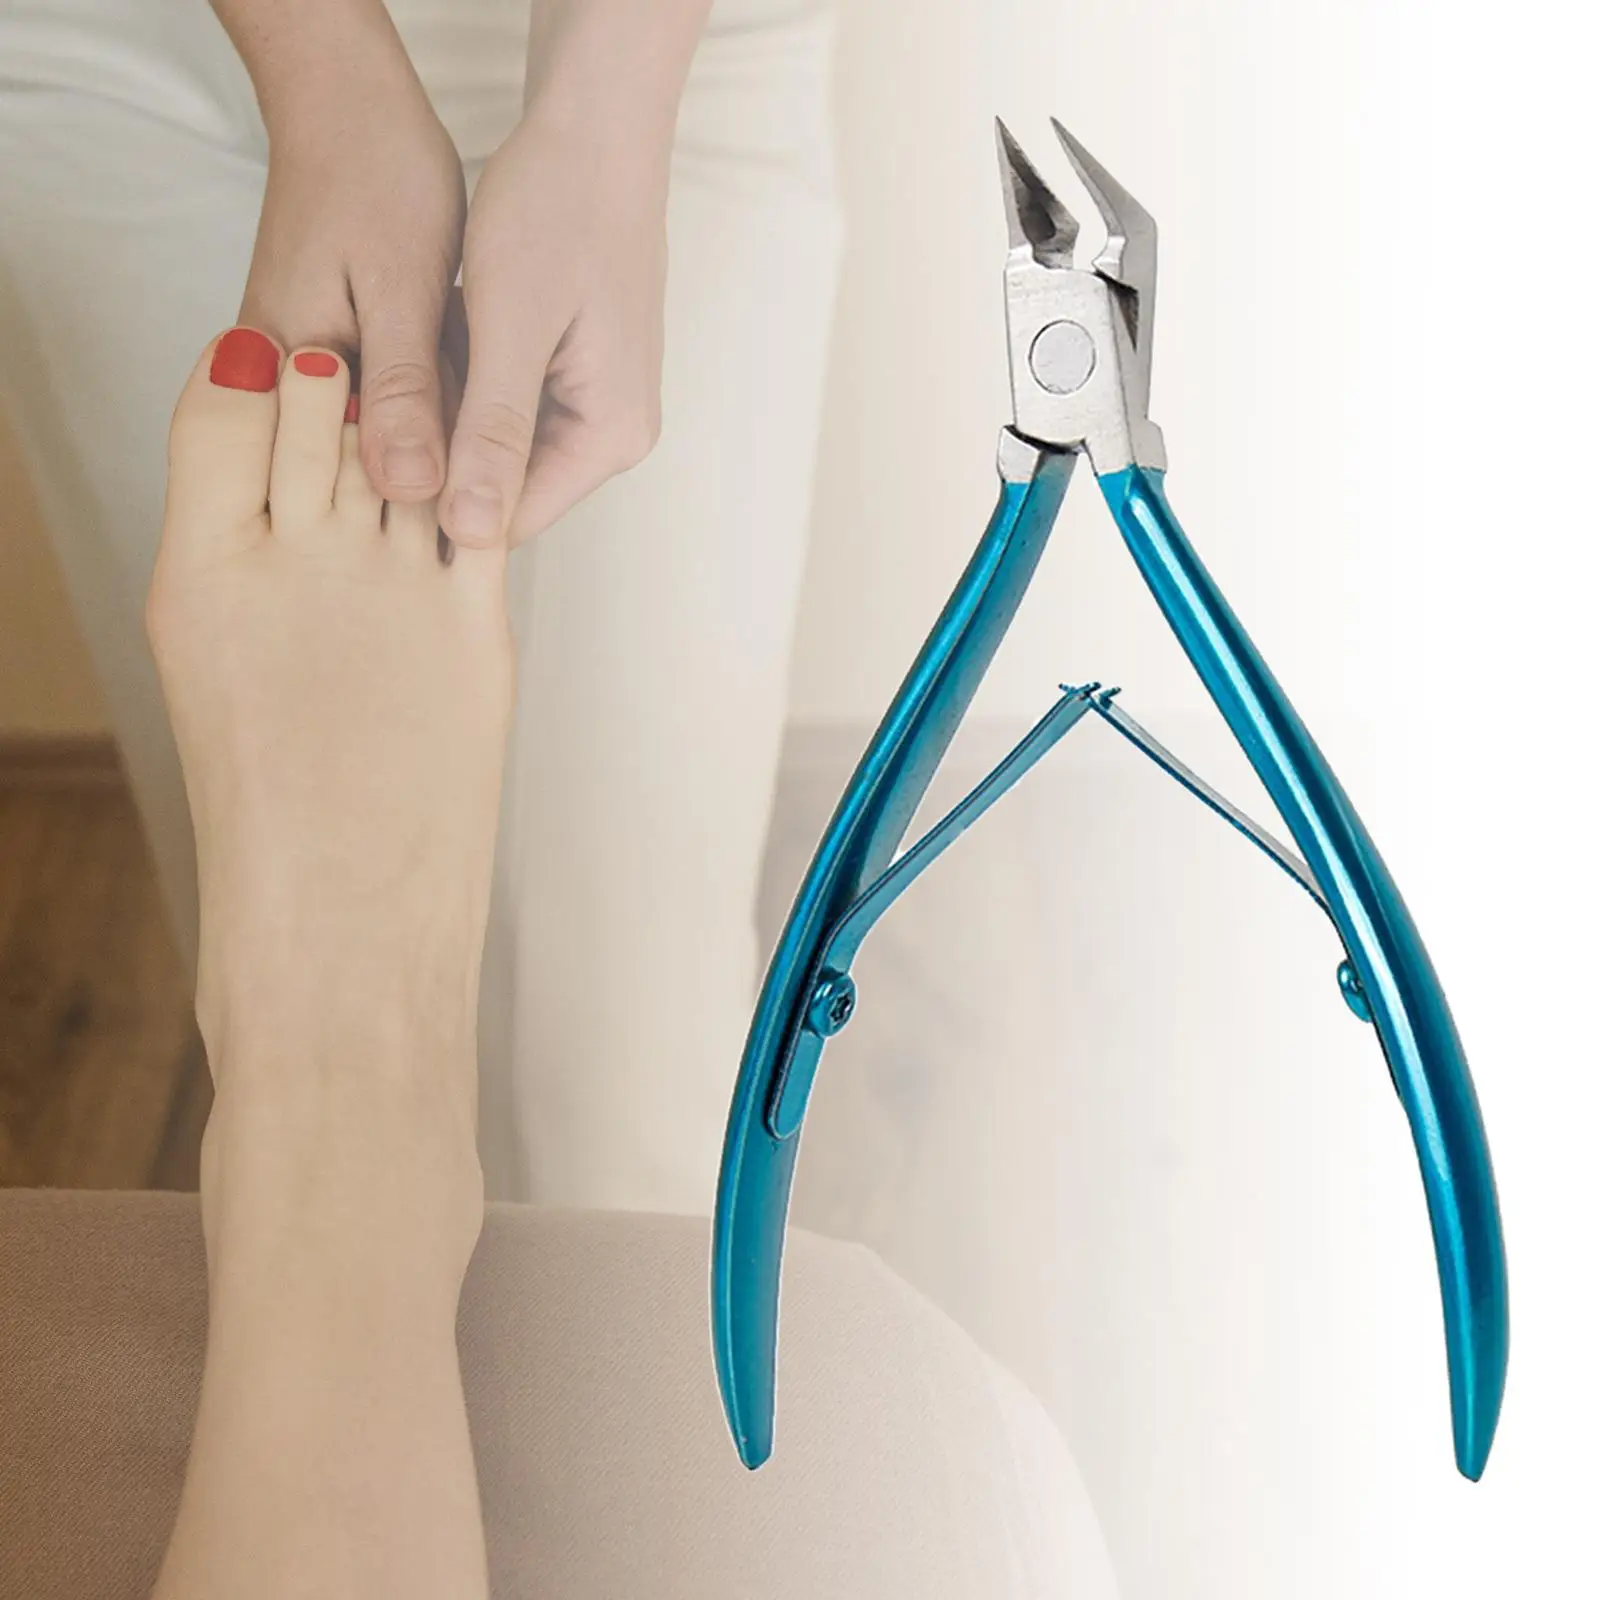 Professional Ingrown Toenail clippers Heavy Duty Precision Nail scissors Rustproof Toenails Cutter for Thick Nails Calluses Home